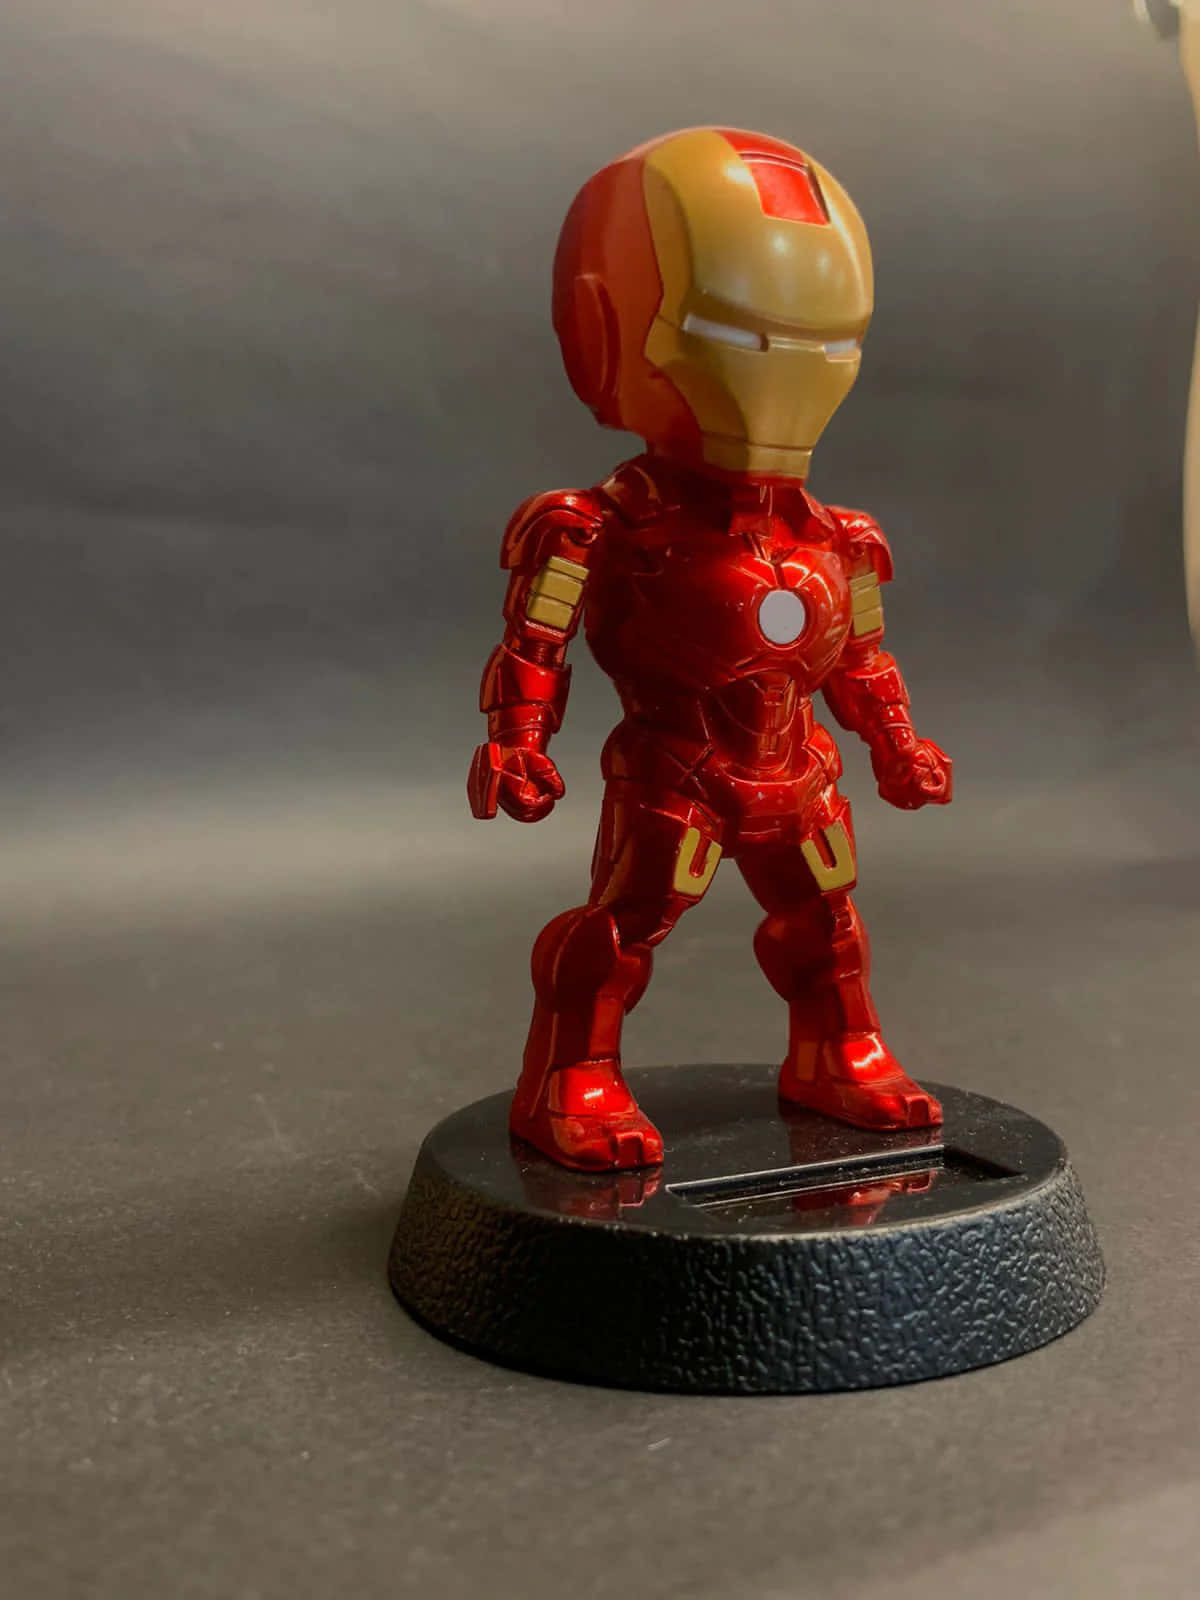 Celebrate the Iron Man with Stylized Bobbleheads. Wallpaper